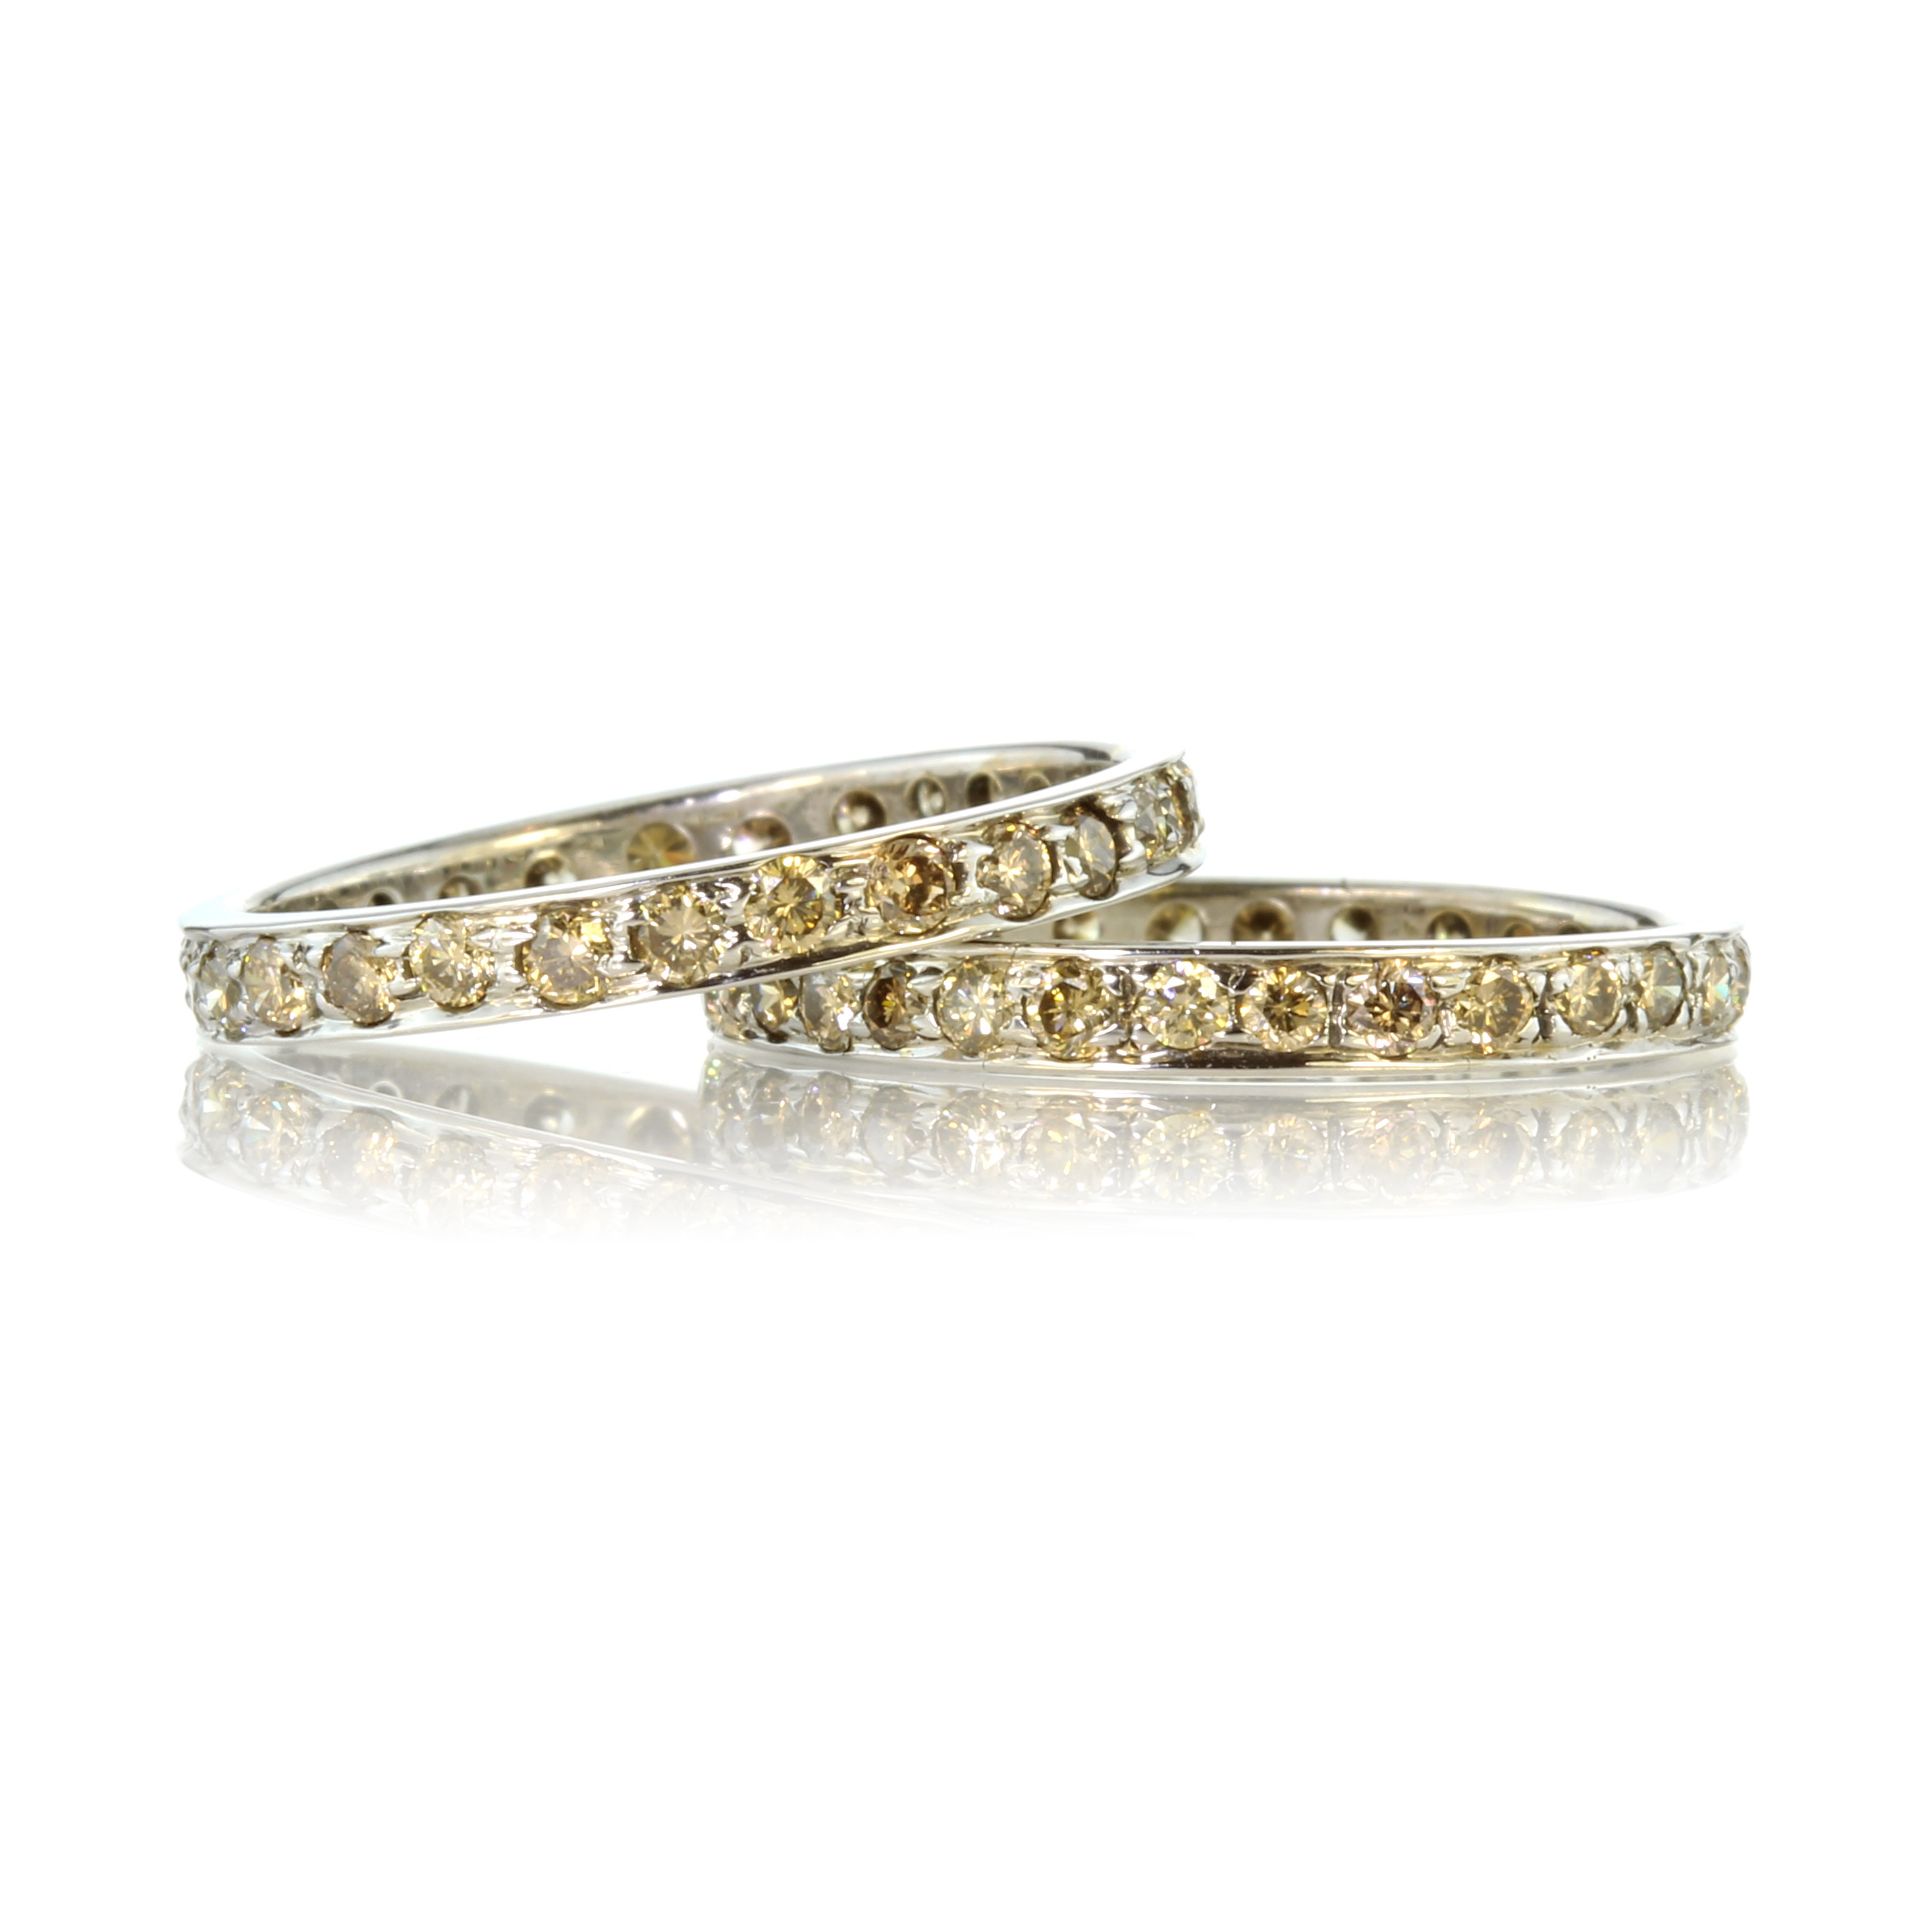 A pair of yellow diamond eternity rings in white gold each set with round cut yellow diamonds.